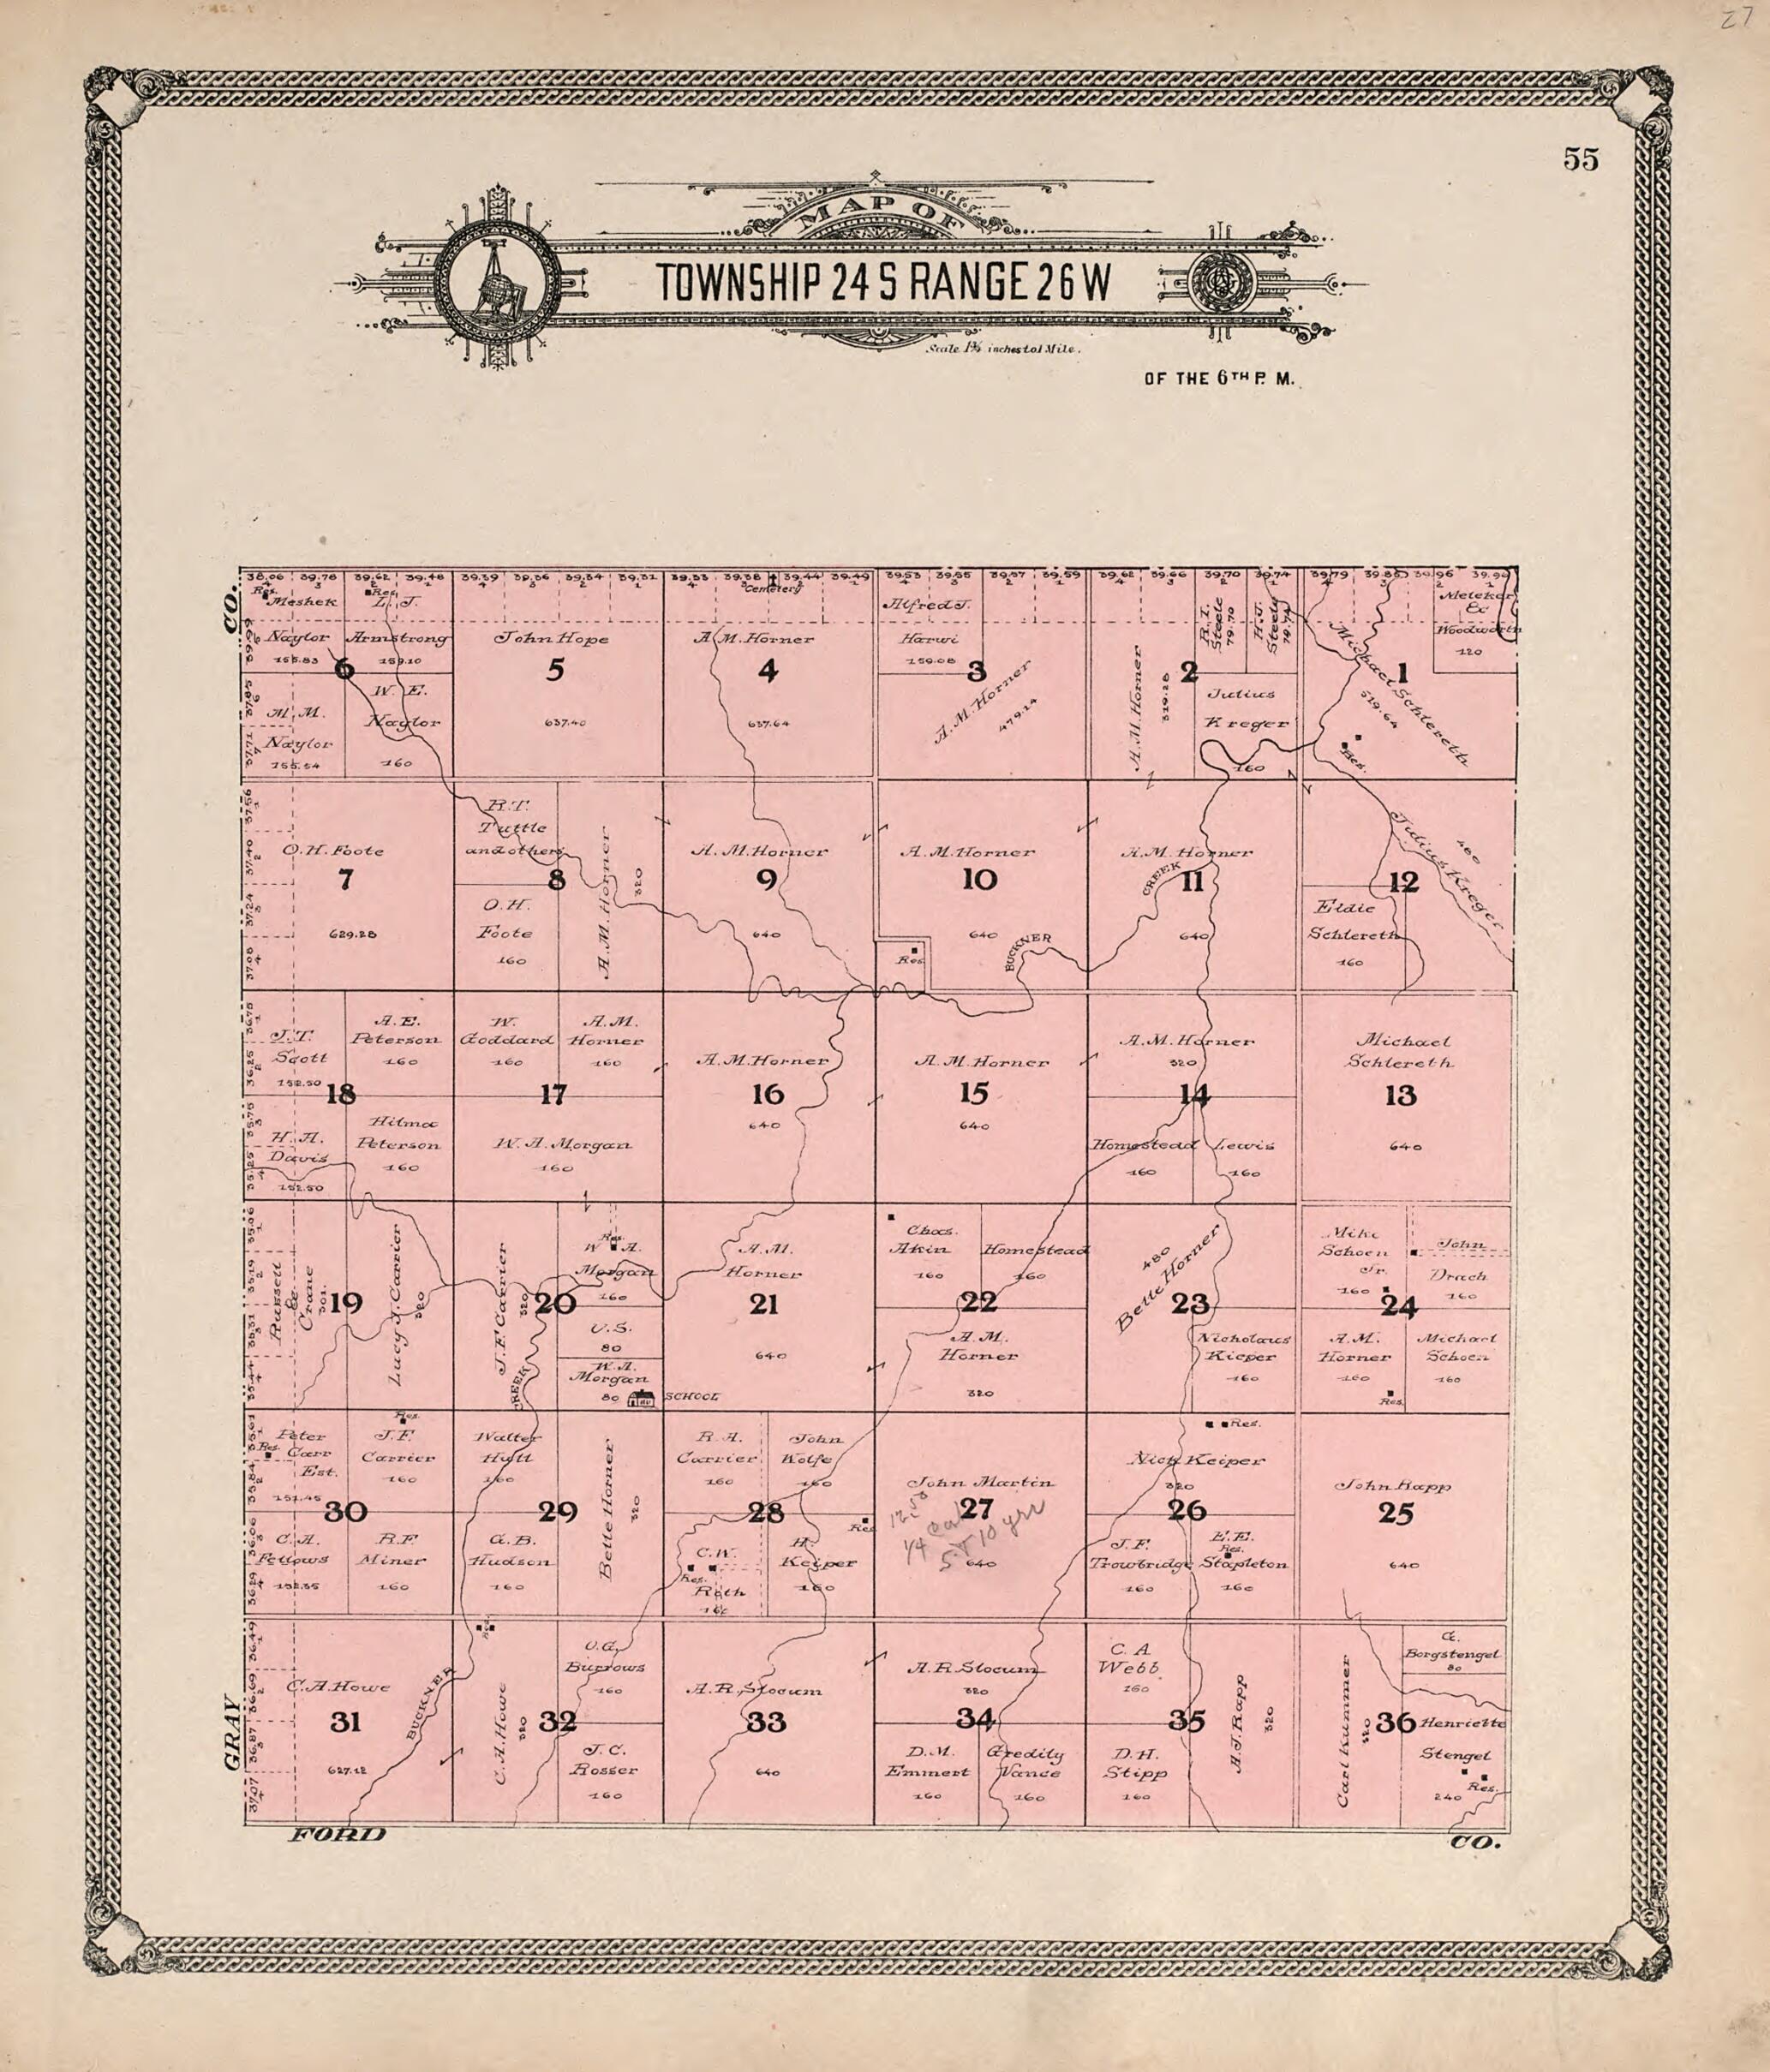 This old map of Map of Township 24 S Range 26 W from Standard Atlas of Hodgeman County, Kansas from 1907 was created by  Geo. A. Ogle &amp; Co in 1907